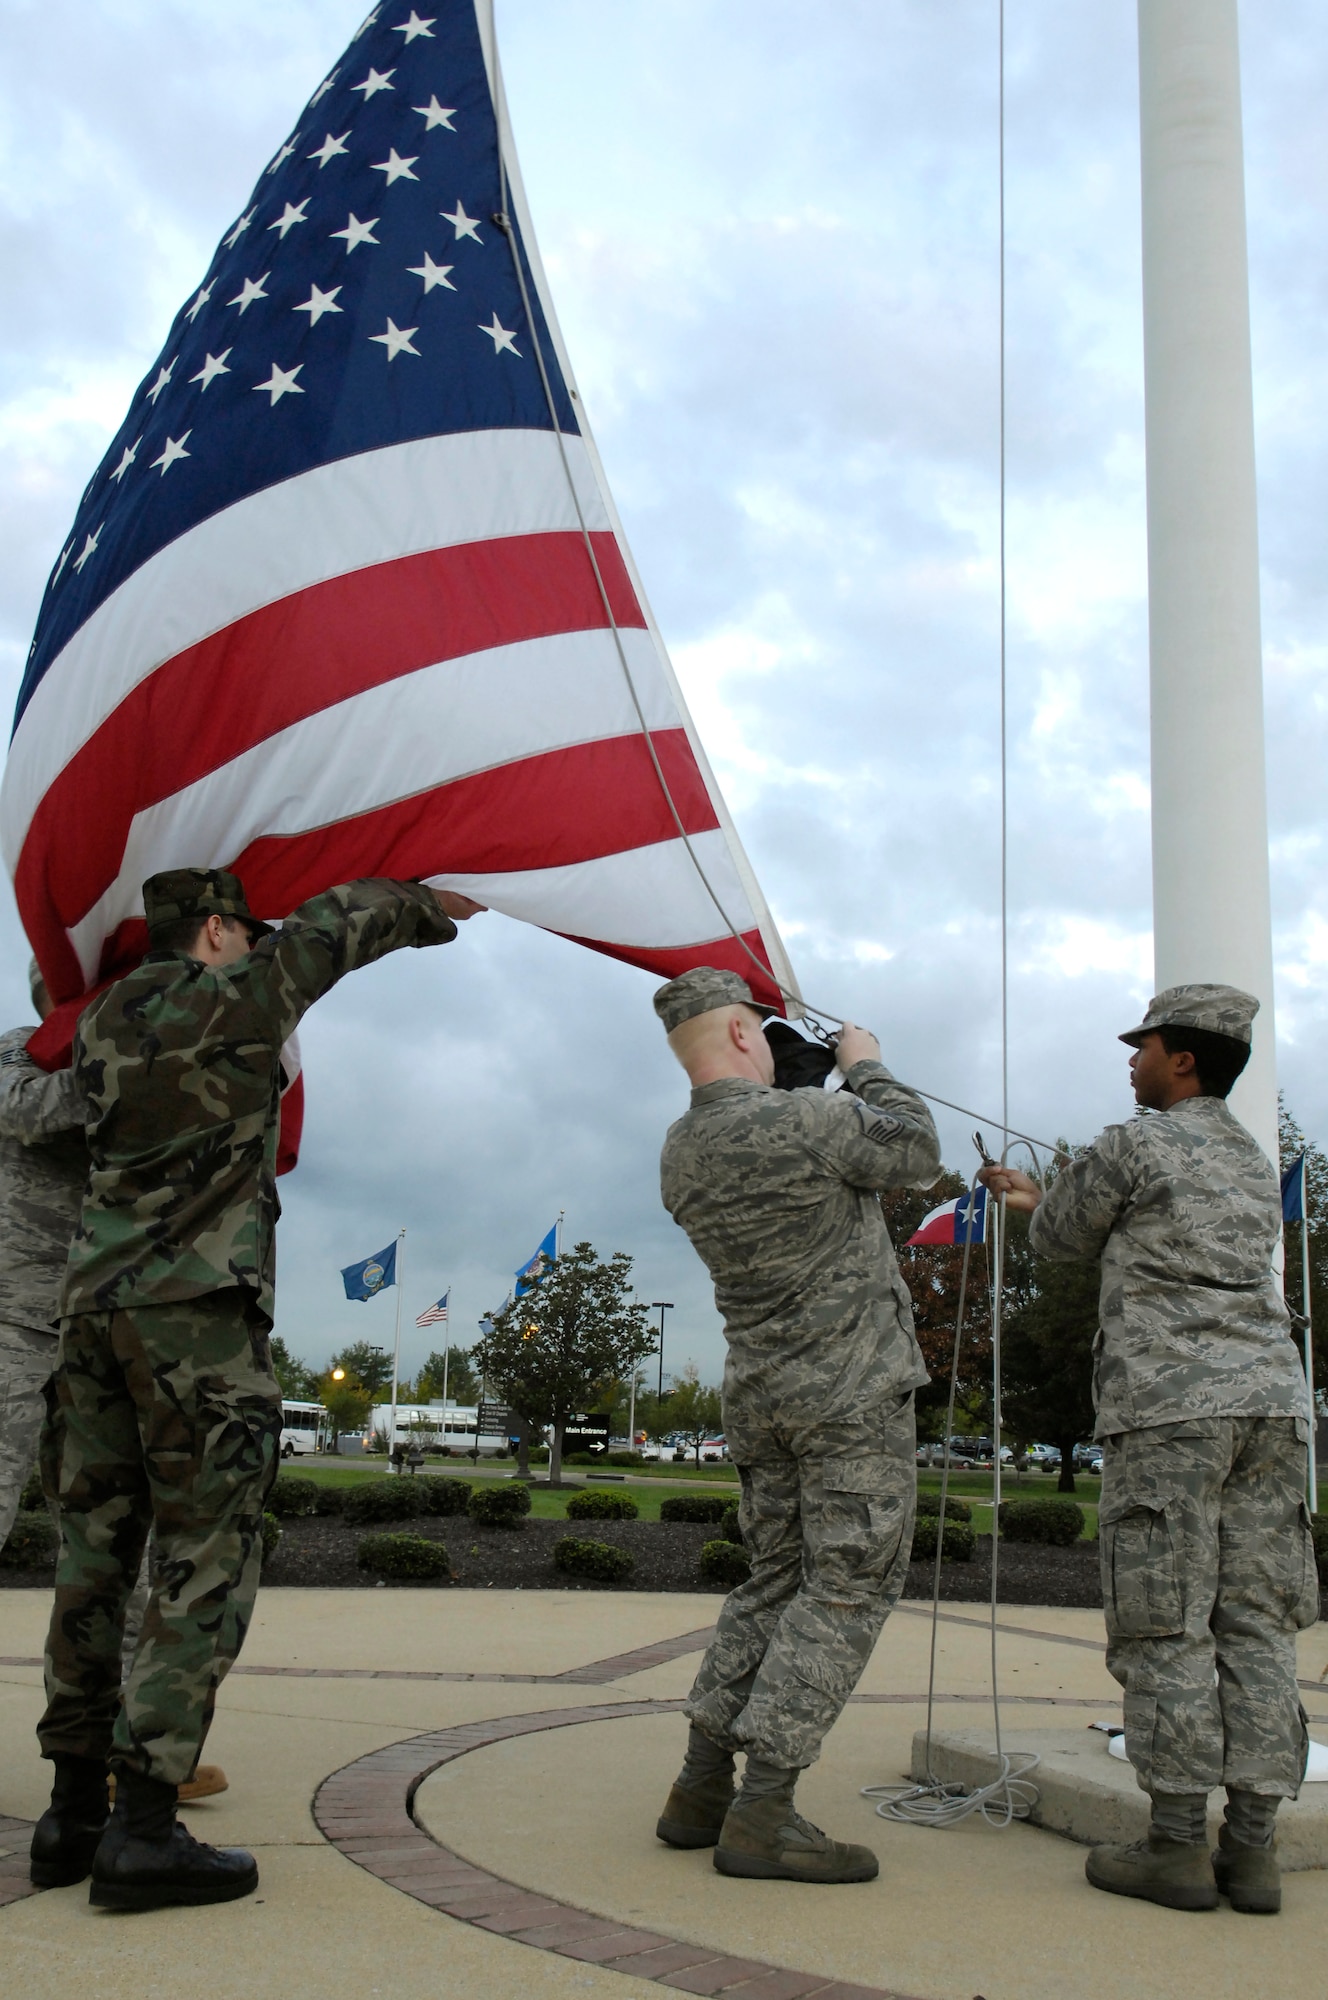 Airmen from the National Capital Region attach a POW/MIA flag Sept. 19 to the flagpole on Bolling. The flag was attached during a reveille ceremony as part of the National POW/MIA Day. (U.S. Air Force Photo by Senior Airman Dan DeCook)